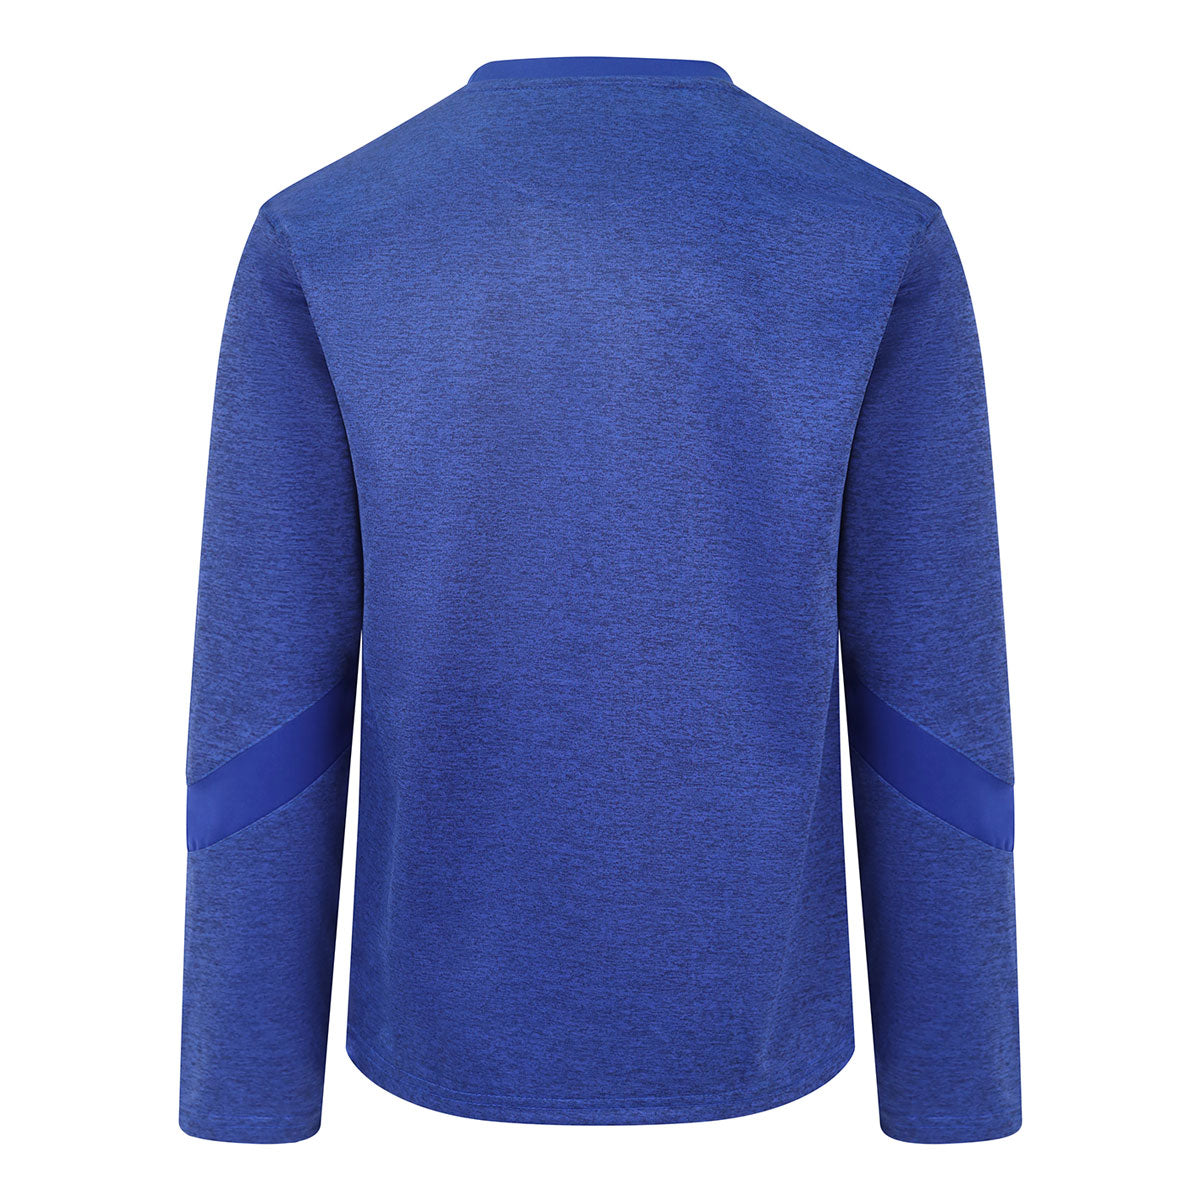 Mc Keever Kevins Hurling & Camogie Dublin Core 22 Sweat Top - Adult - Royal